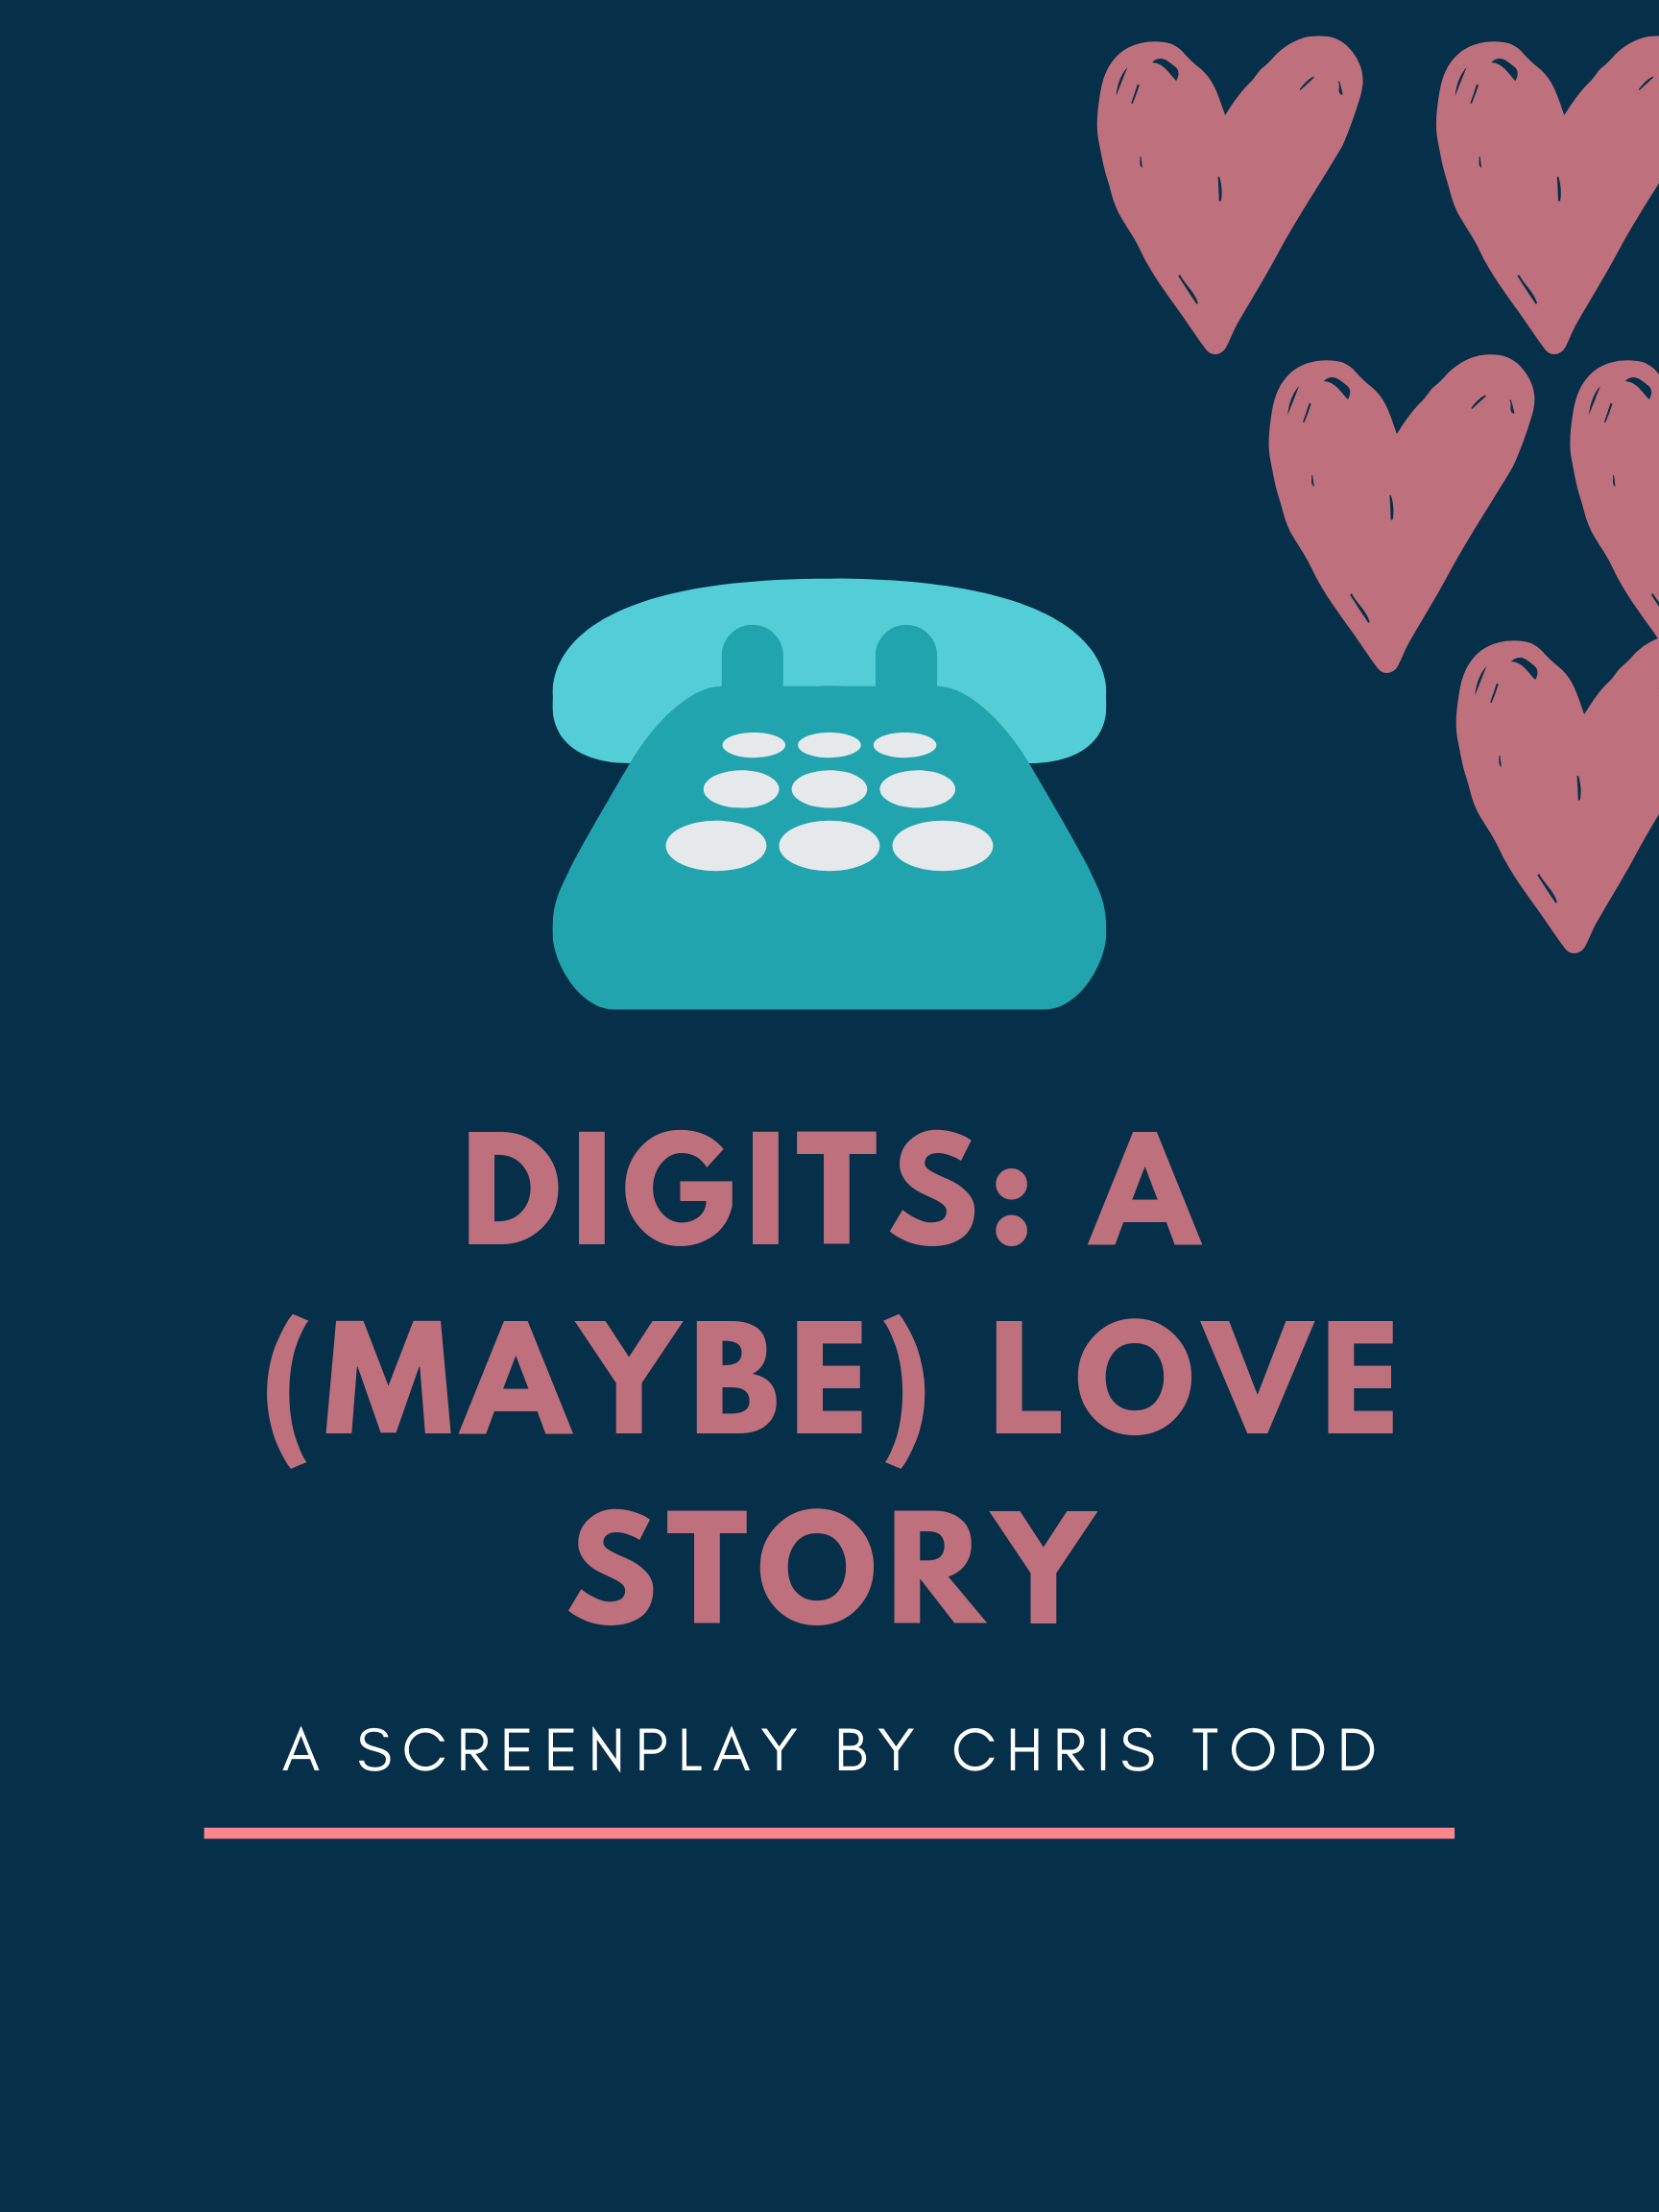 DIGITS: A (MAYBE) LOVE STORY